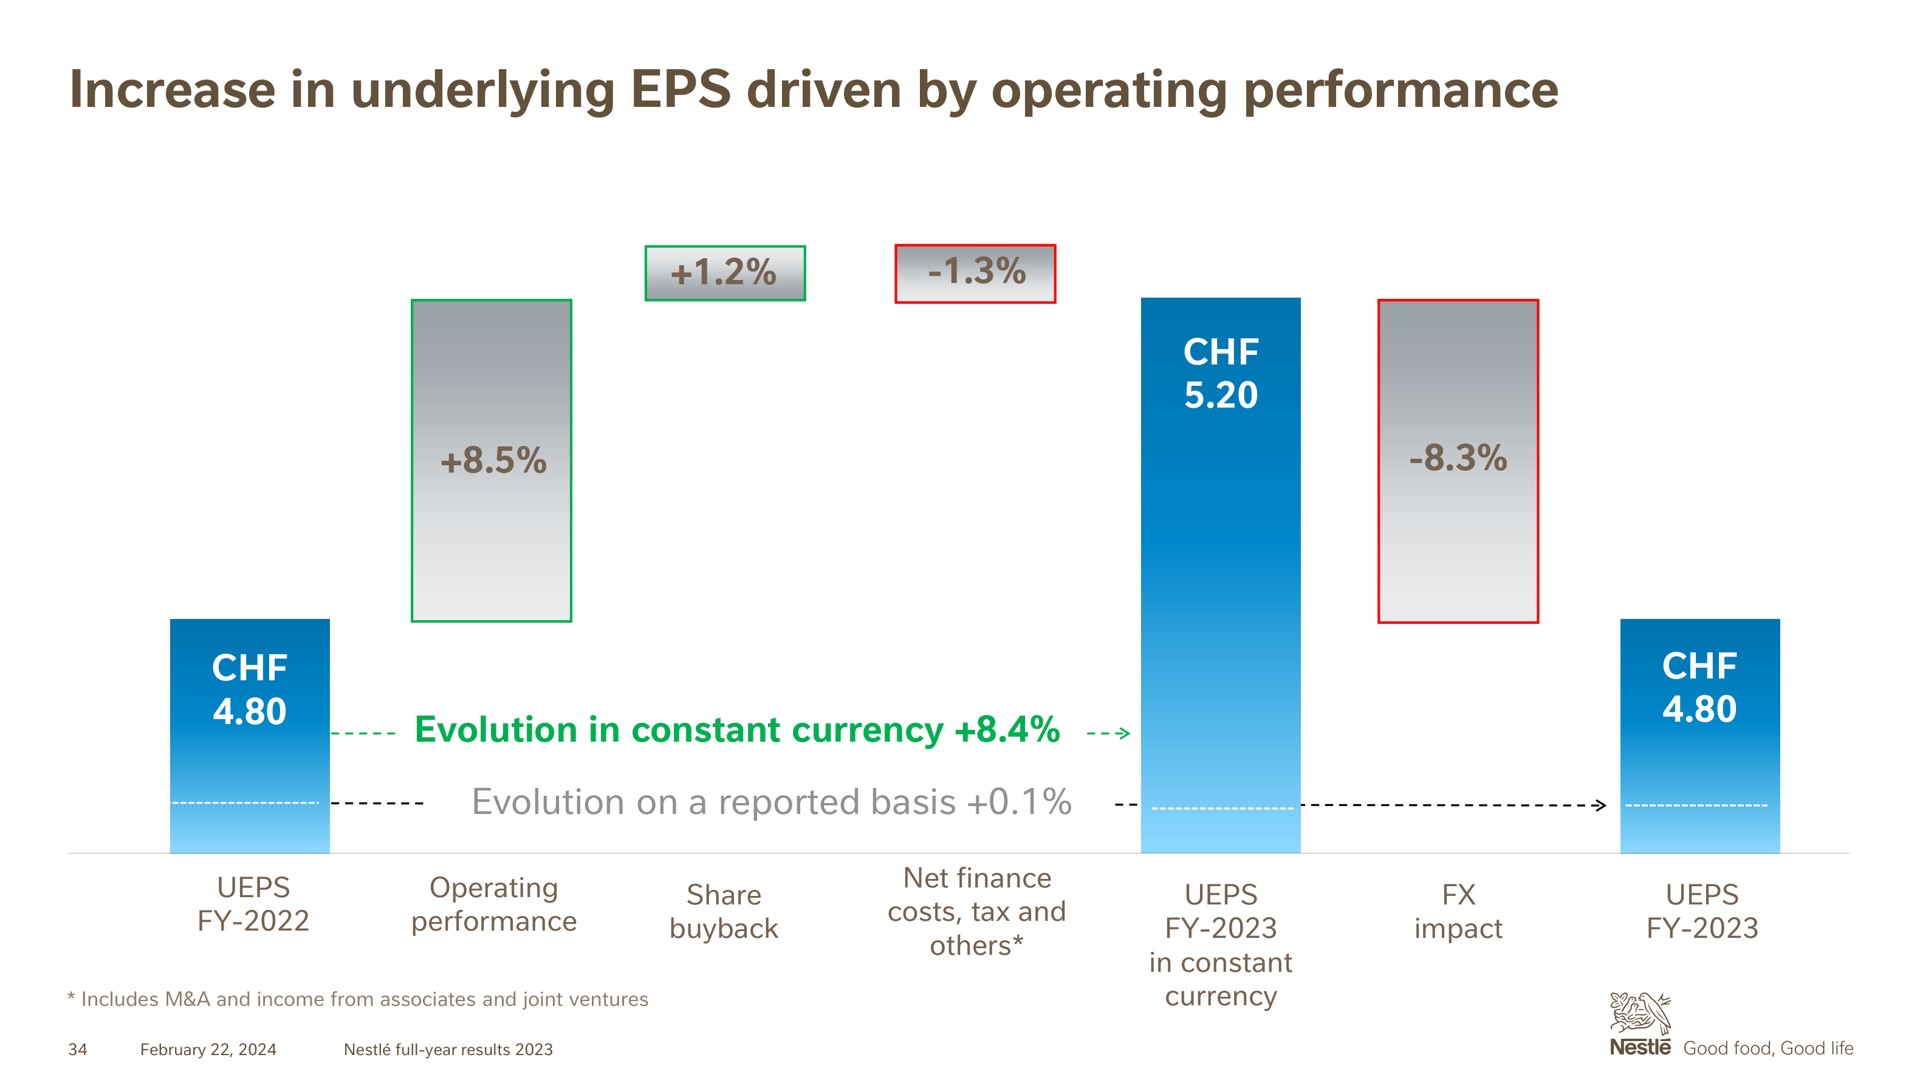 increase in underlying driven by operating performance | Nestle